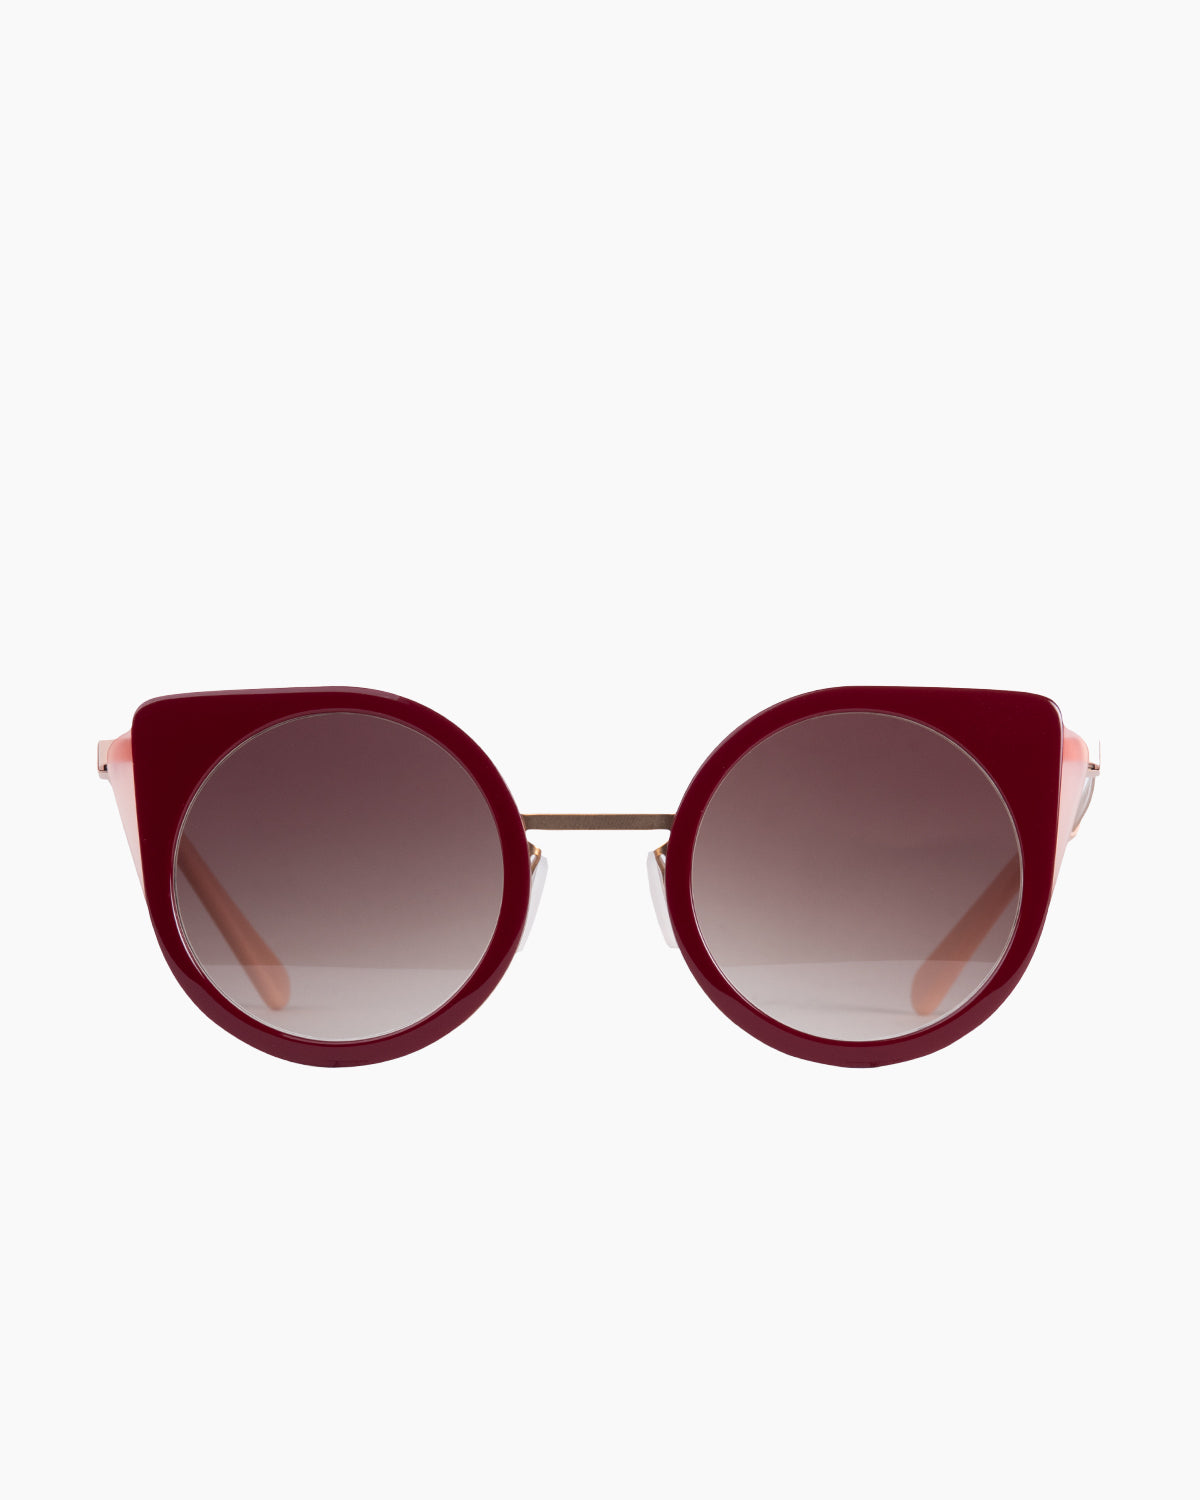 Gamine - CatS - Burgundy/Gold | glasses bar:  Marie-Sophie Dion